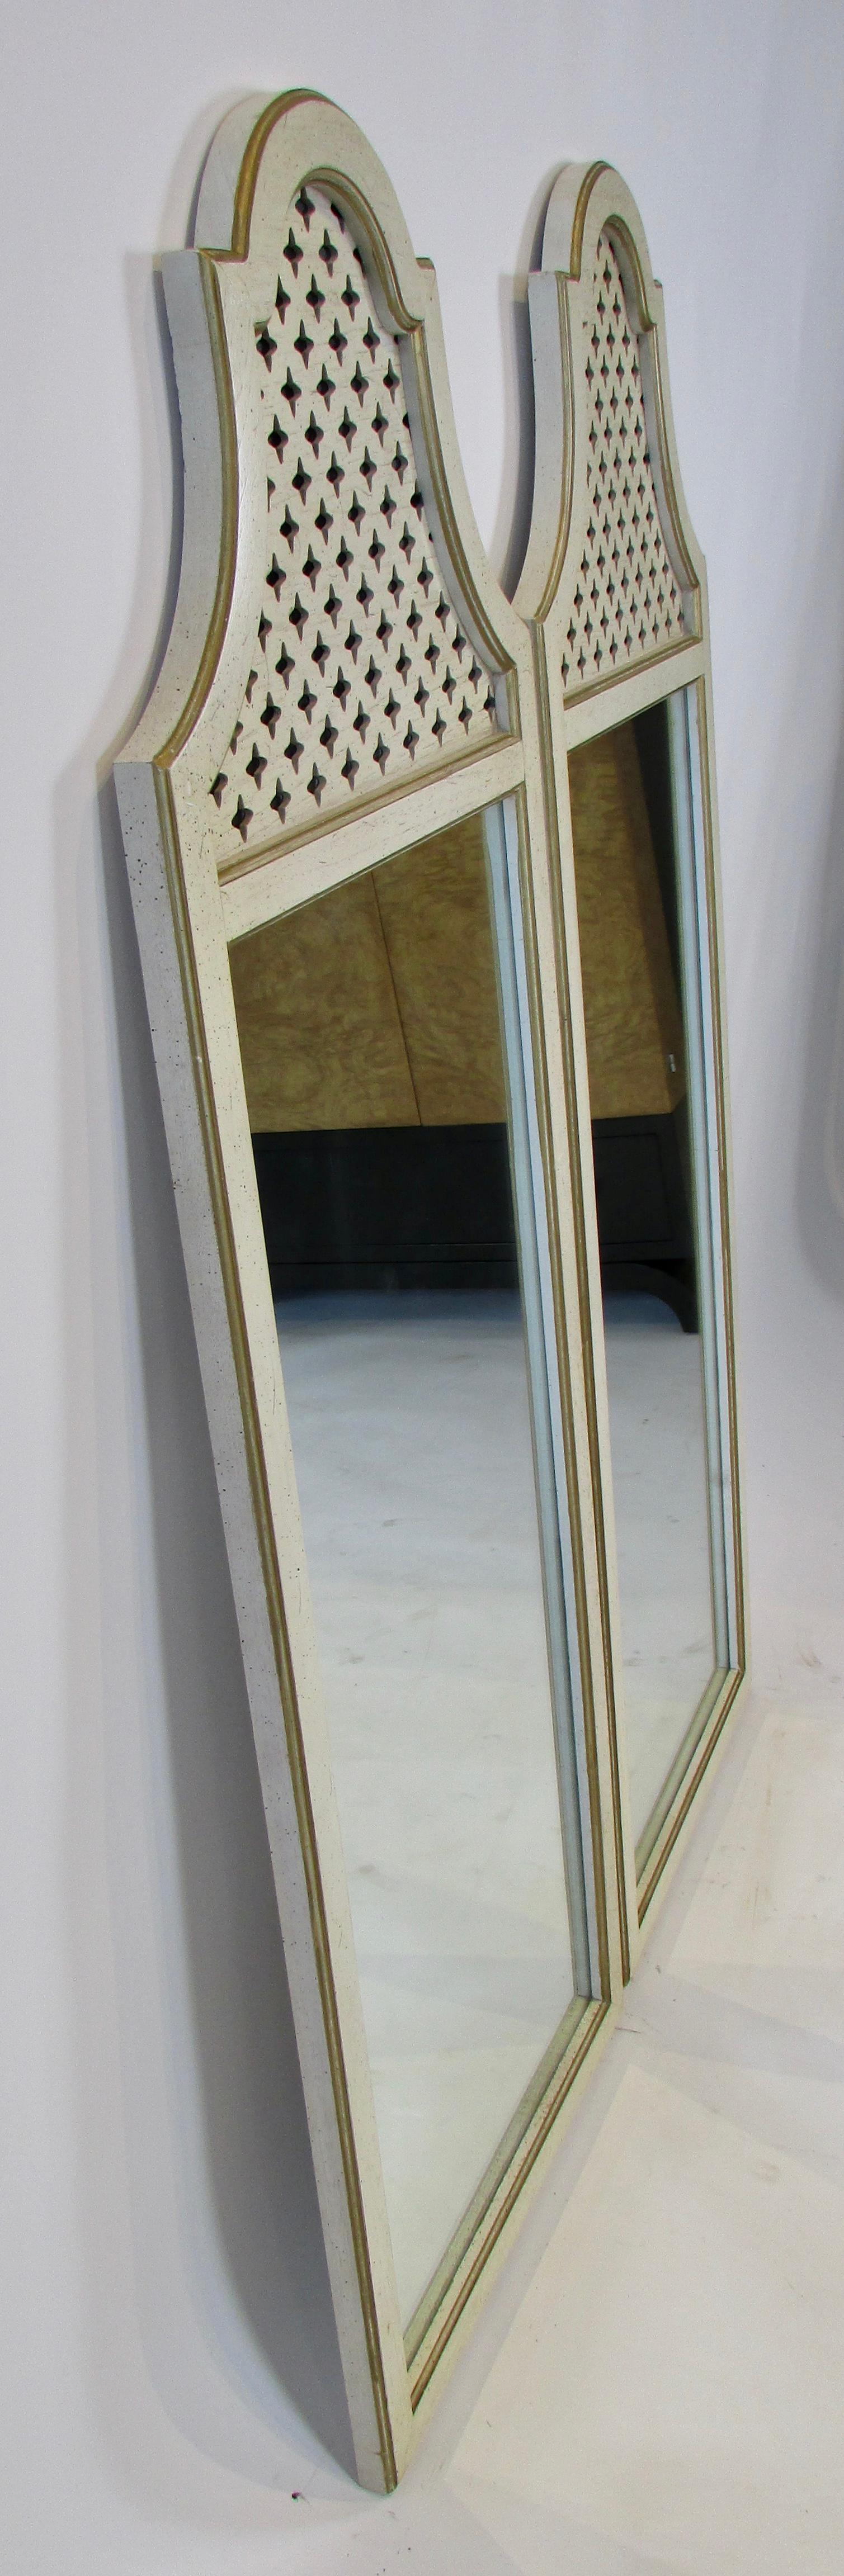 1950s Hollywood Regency Fretwork Style Mirror Pair For Sale 6